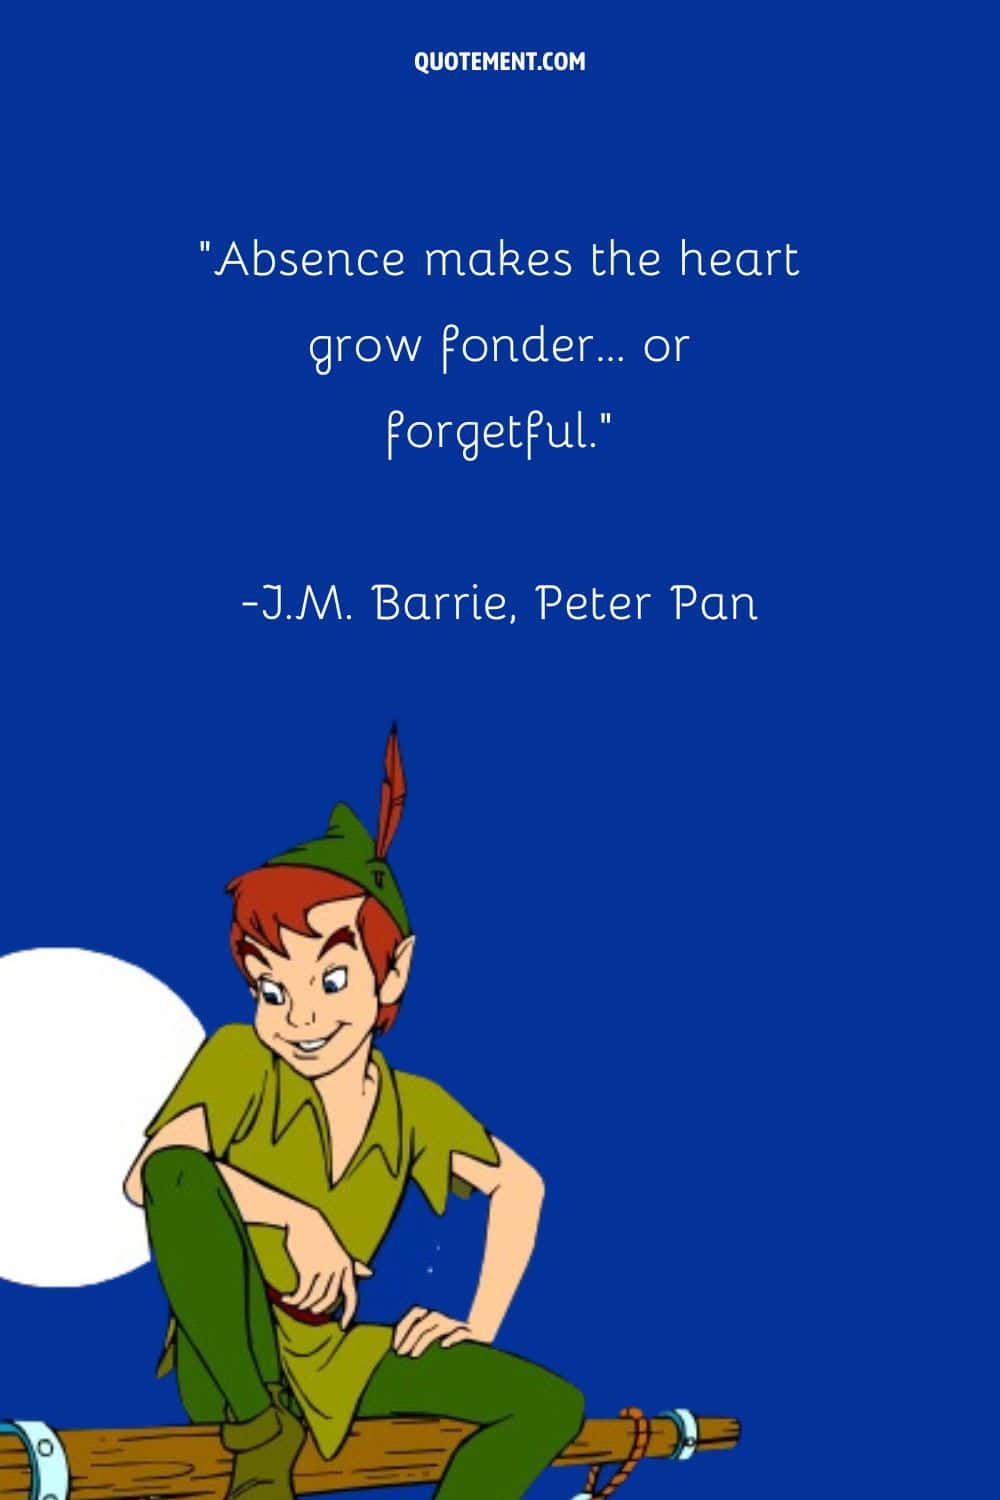 “Absence makes the heart grow fonder… or forgetful.” ― J.M. Barrie, Peter Pan